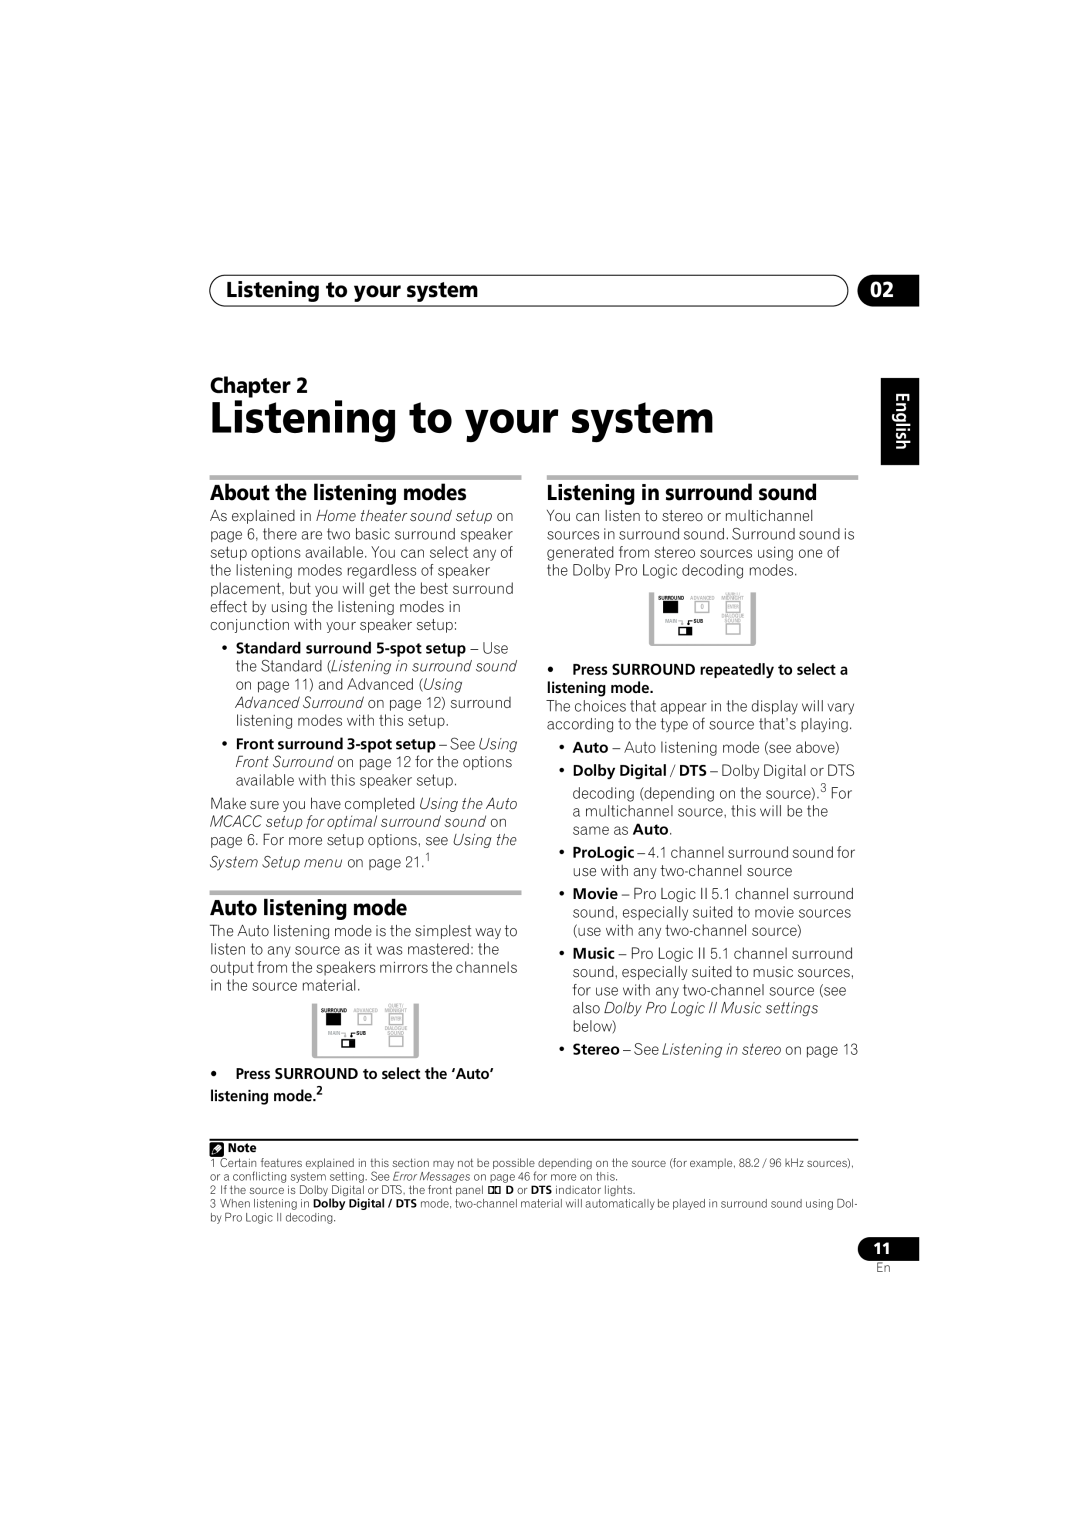 Pioneer XV-DV333, XV-DV434 Listening to your system Chapter, About the listening modes, Auto listening mode, English 